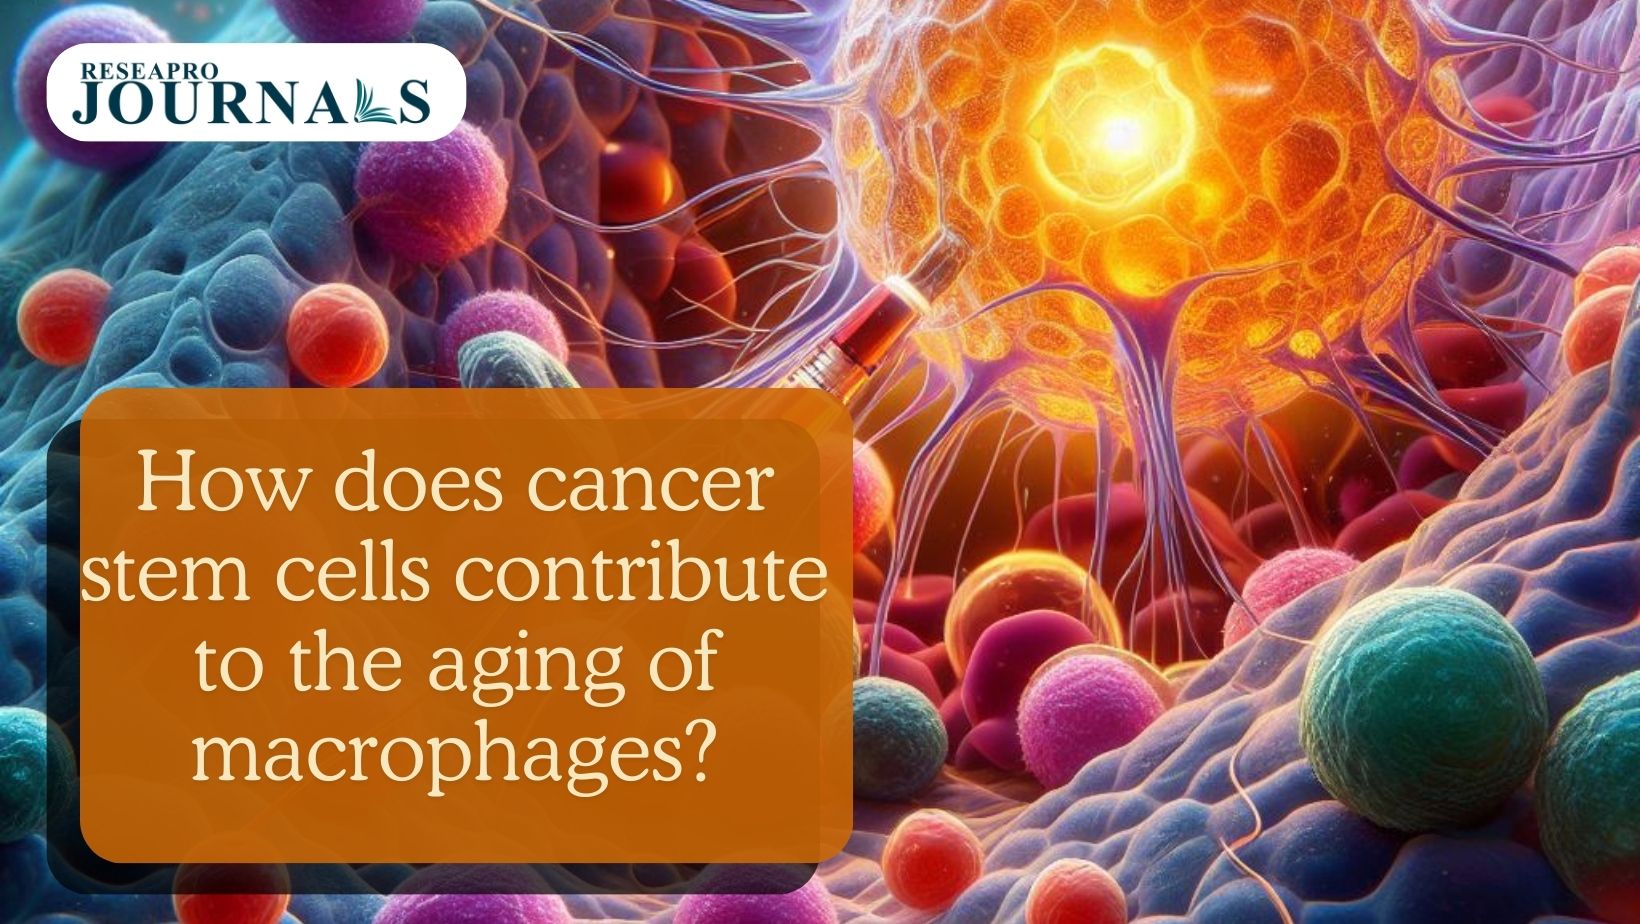 Cancer stem cells impact macrophage aging in tumors.